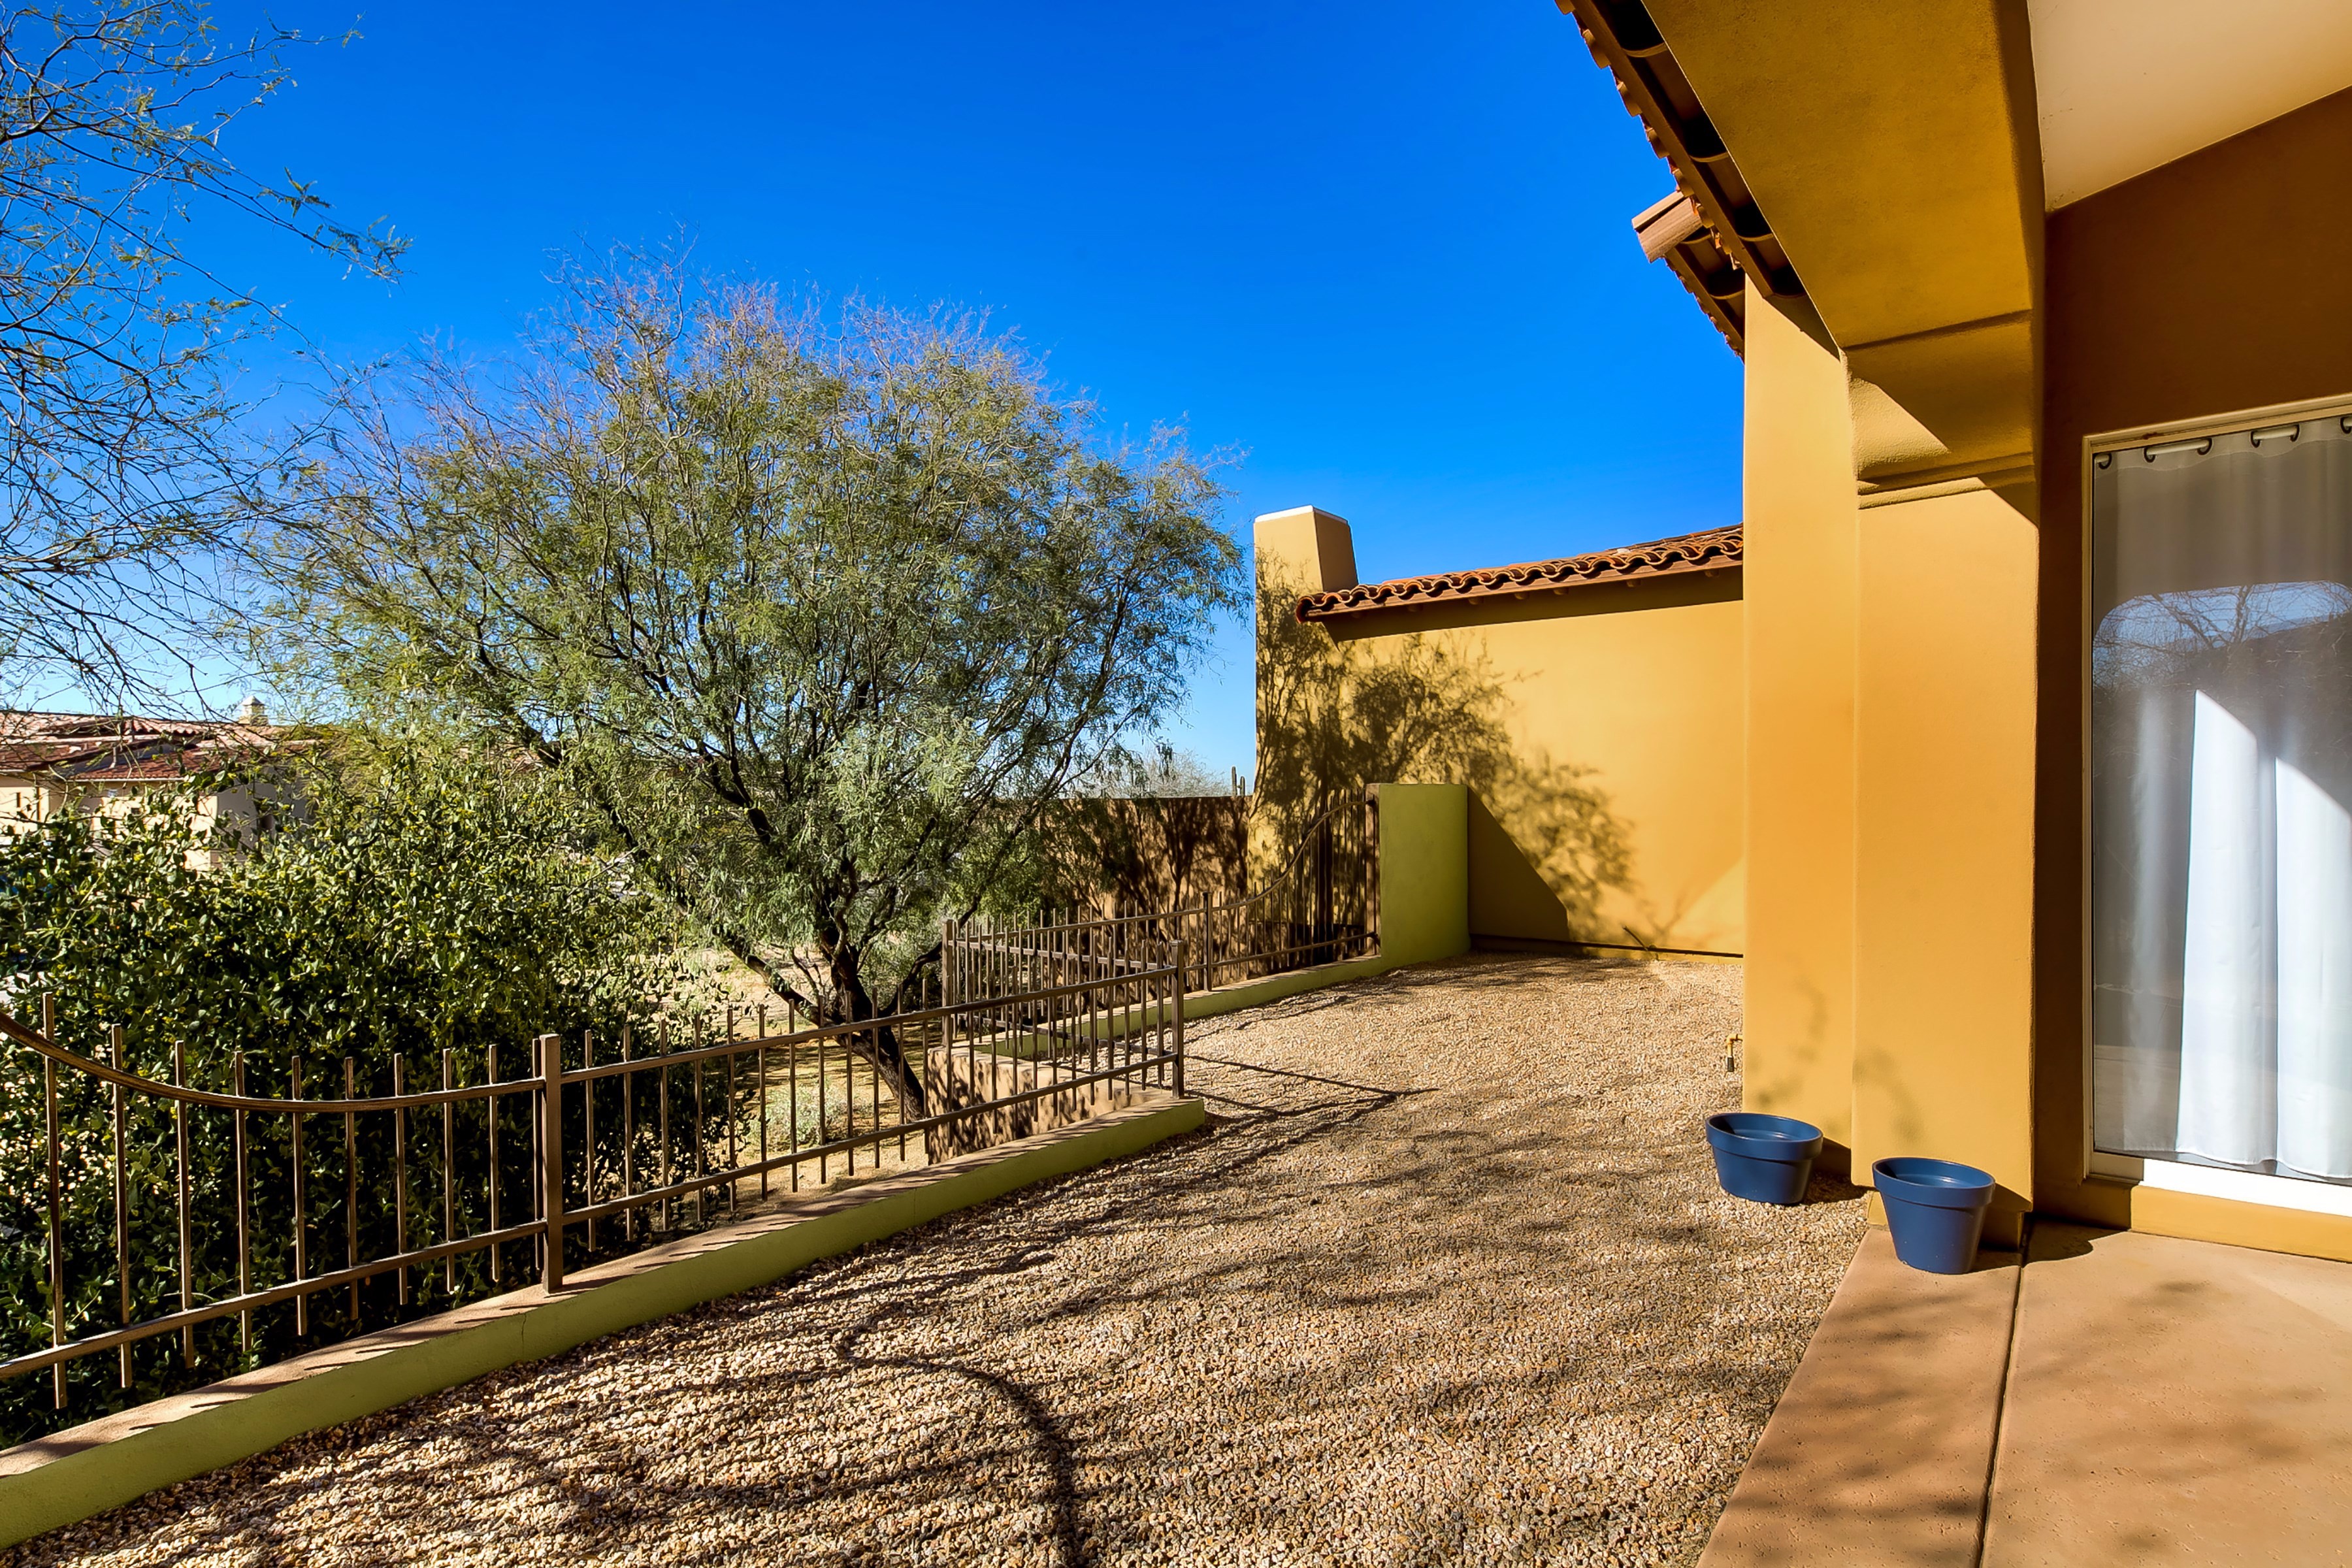 Low-maintenance landscaping at this Scottsdale home for sale in DC Ranch located at 8867 E Mountain Spring Rd Scottsdale, AZ 85255 listed by Don Matheson at The Matheson Team